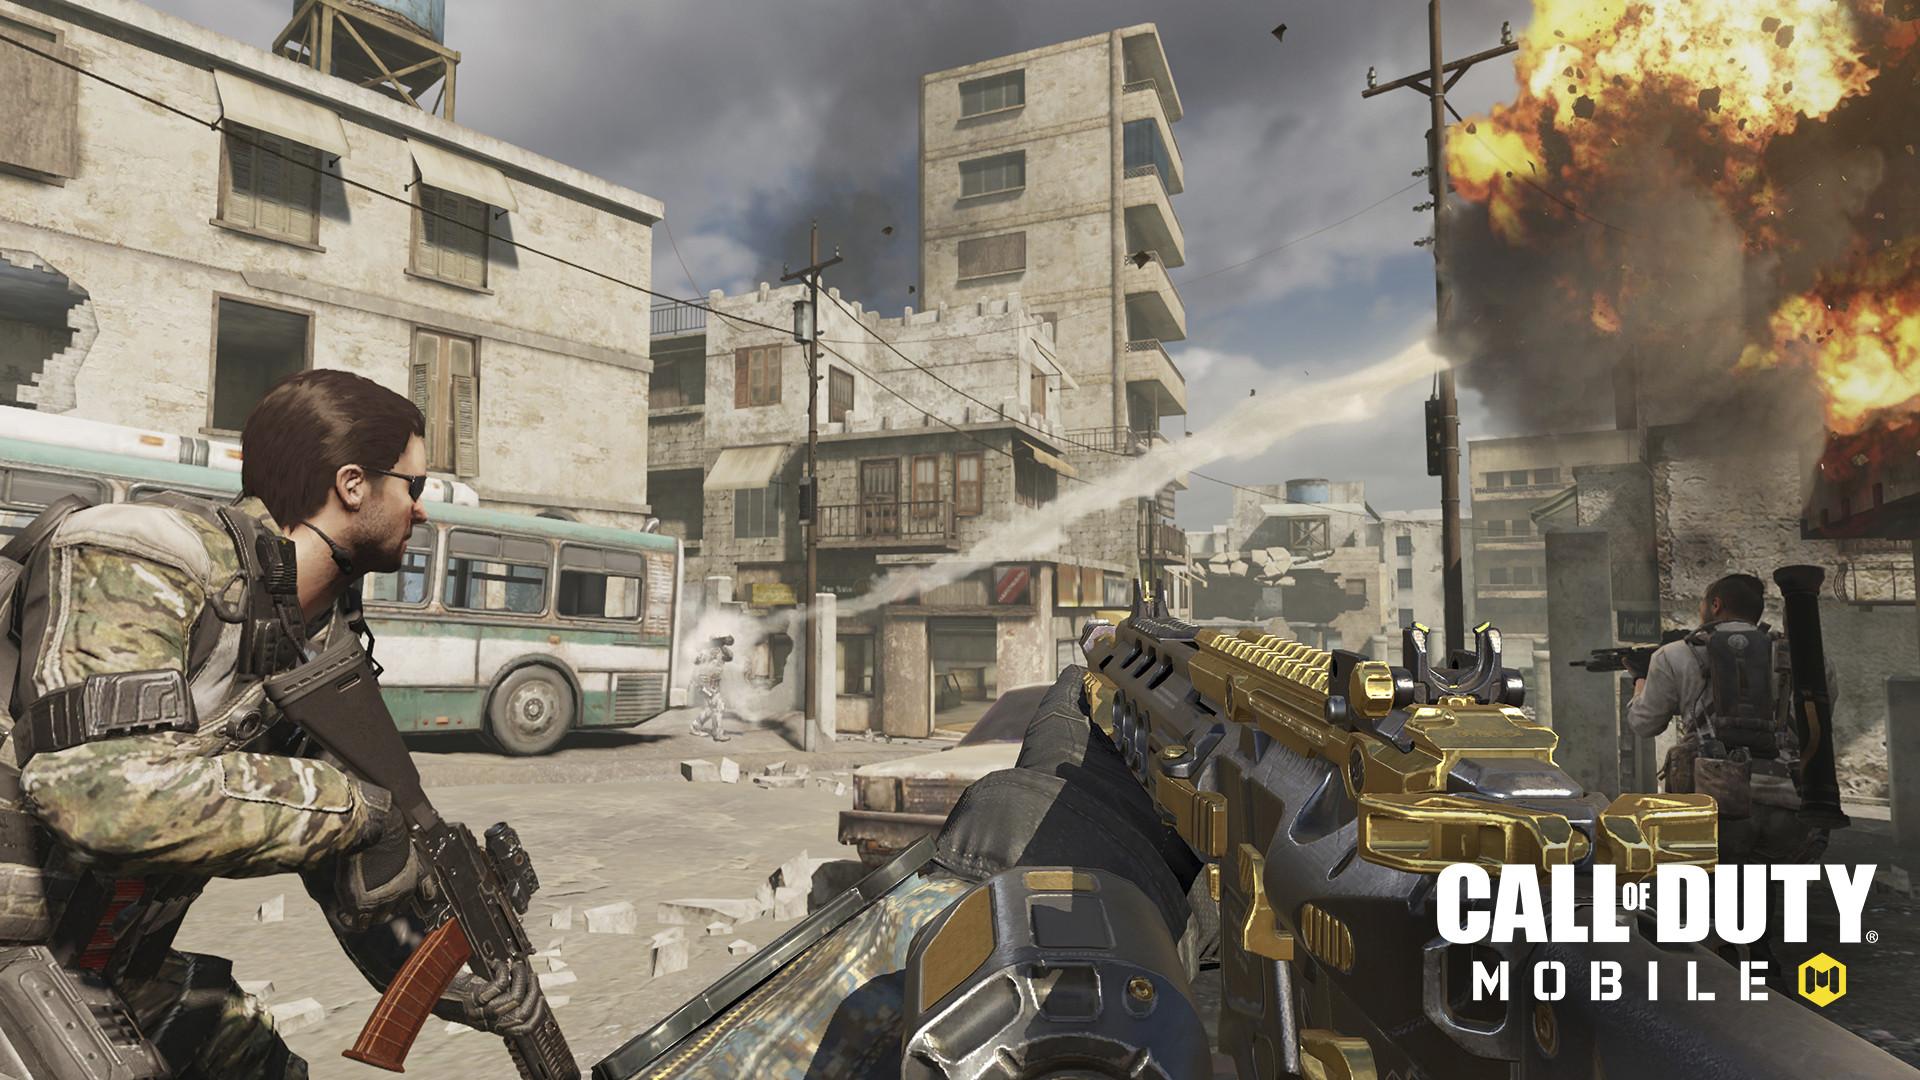 Sensor Tower - Call of Duty: Mobile passed 250 million downloads in 8 months